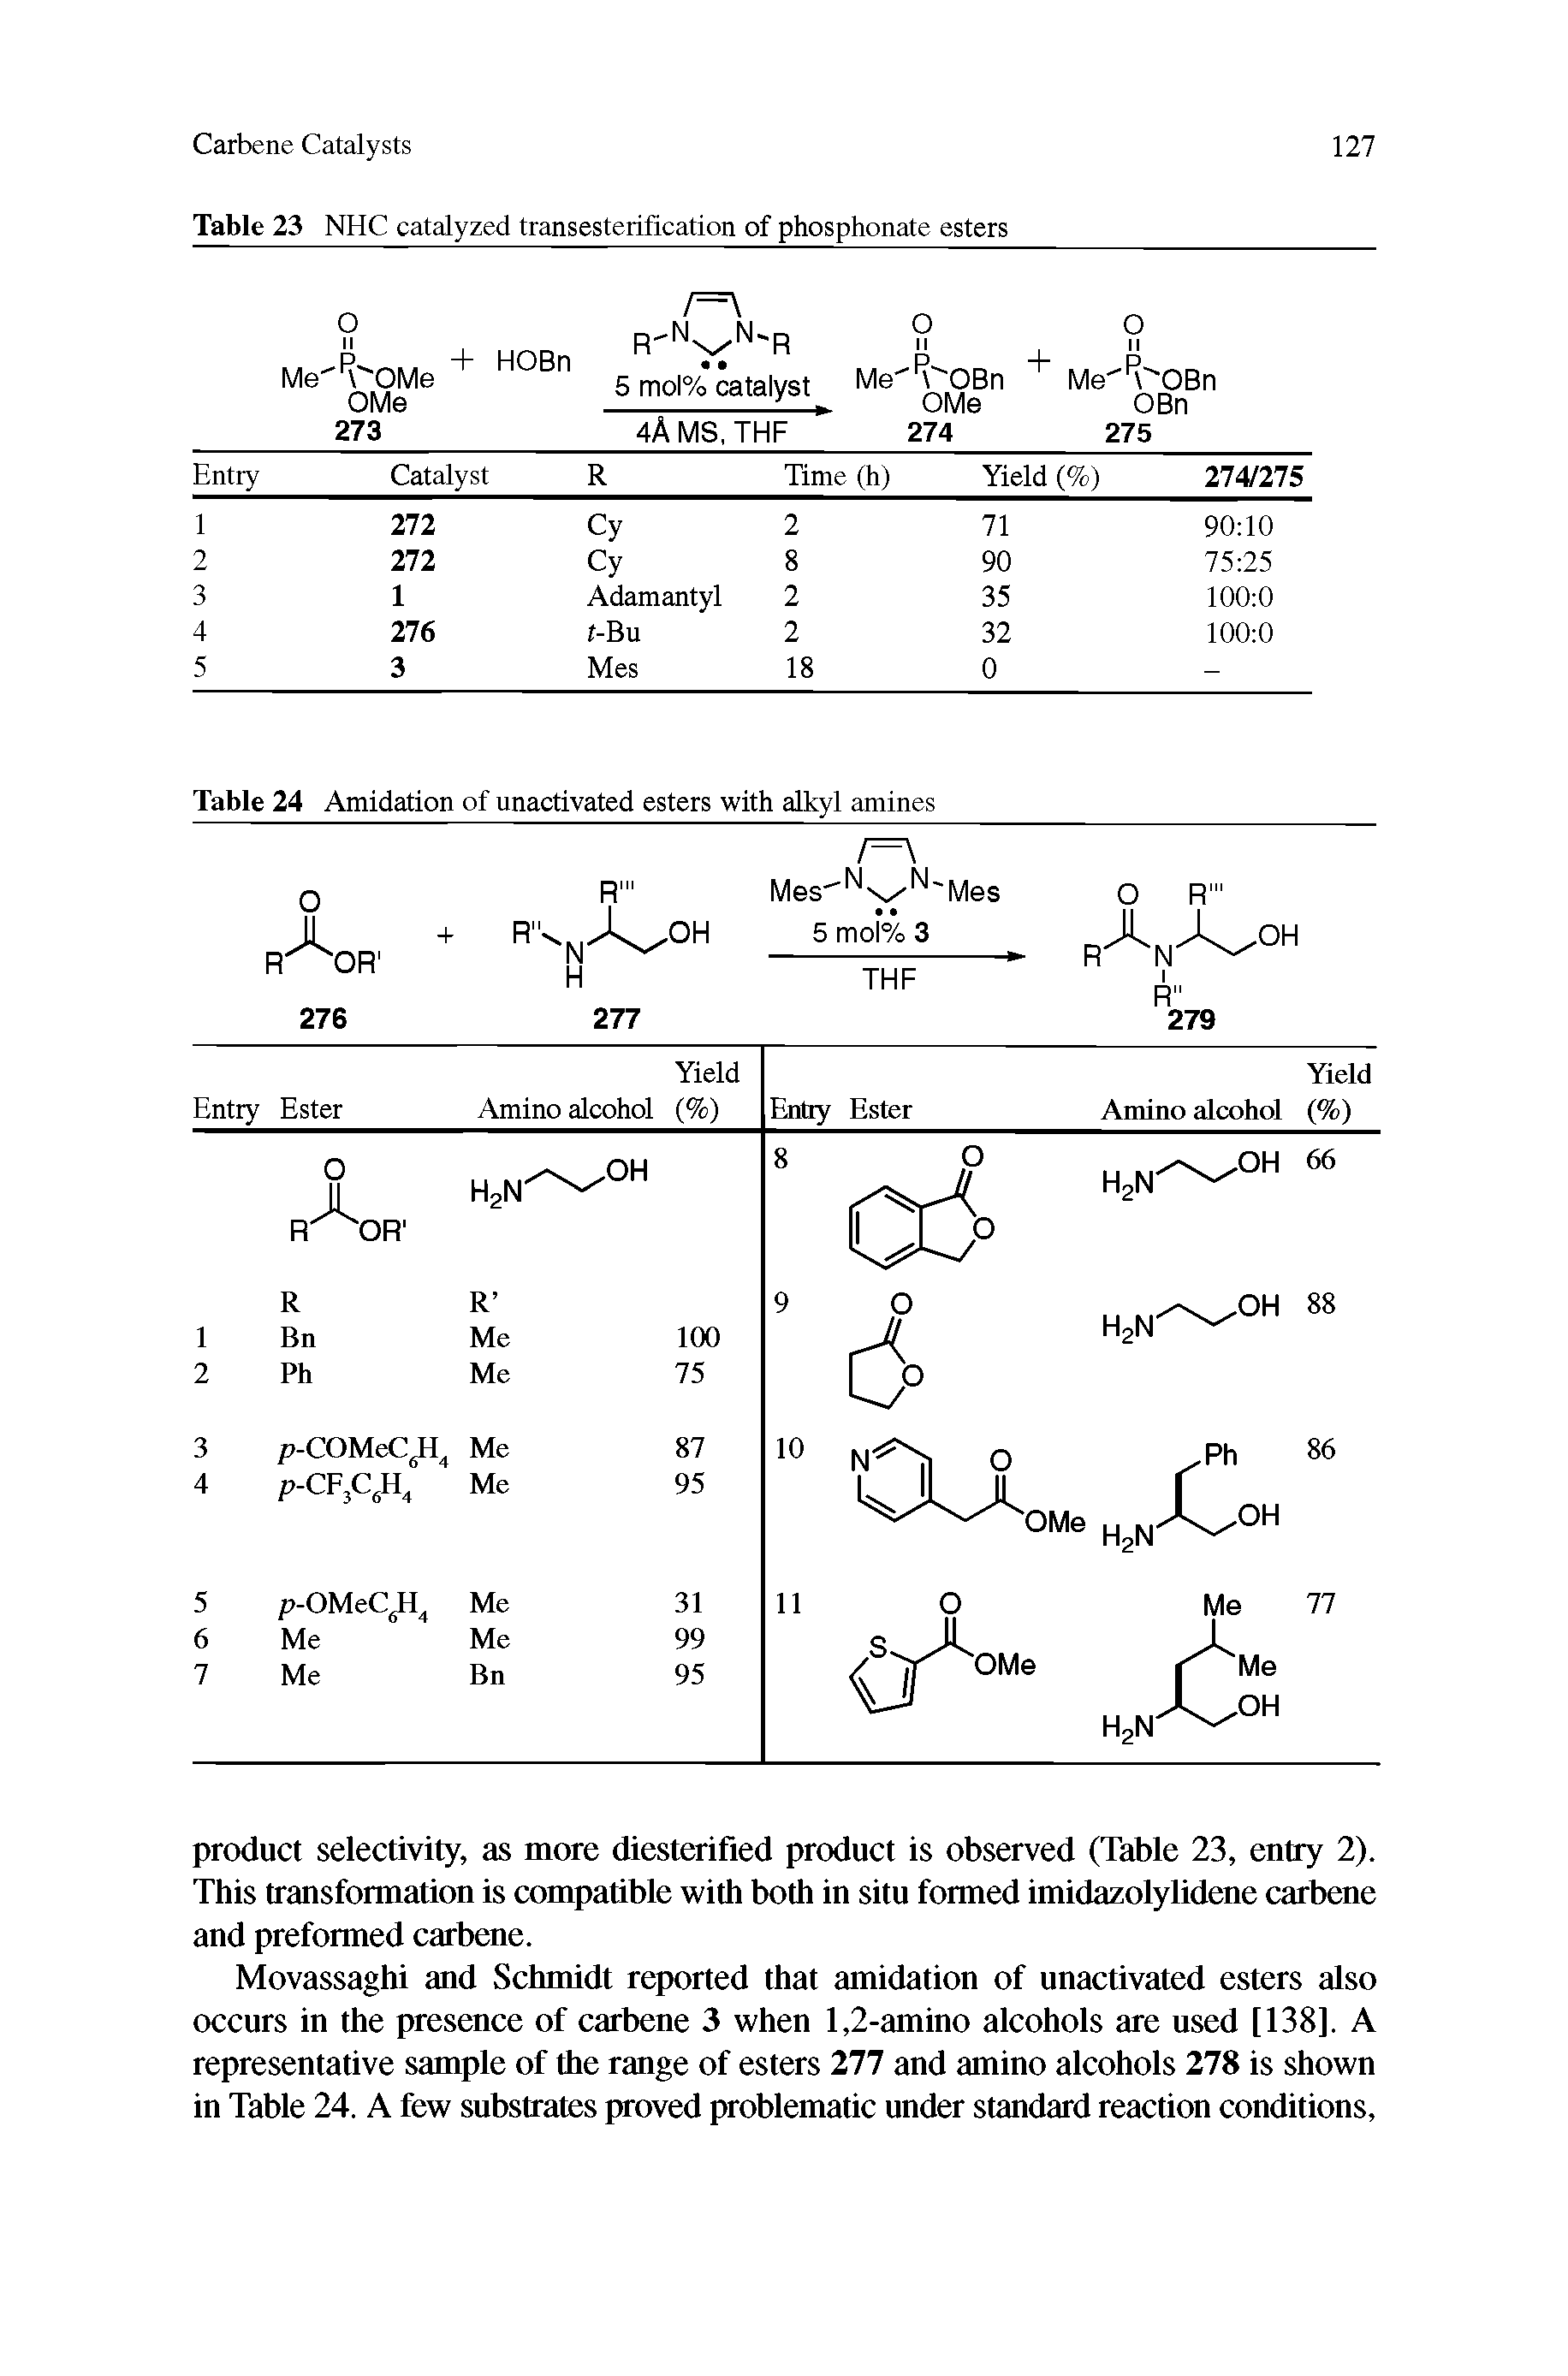 Table 24 Amidation of unactivated esters with alkyl amines...